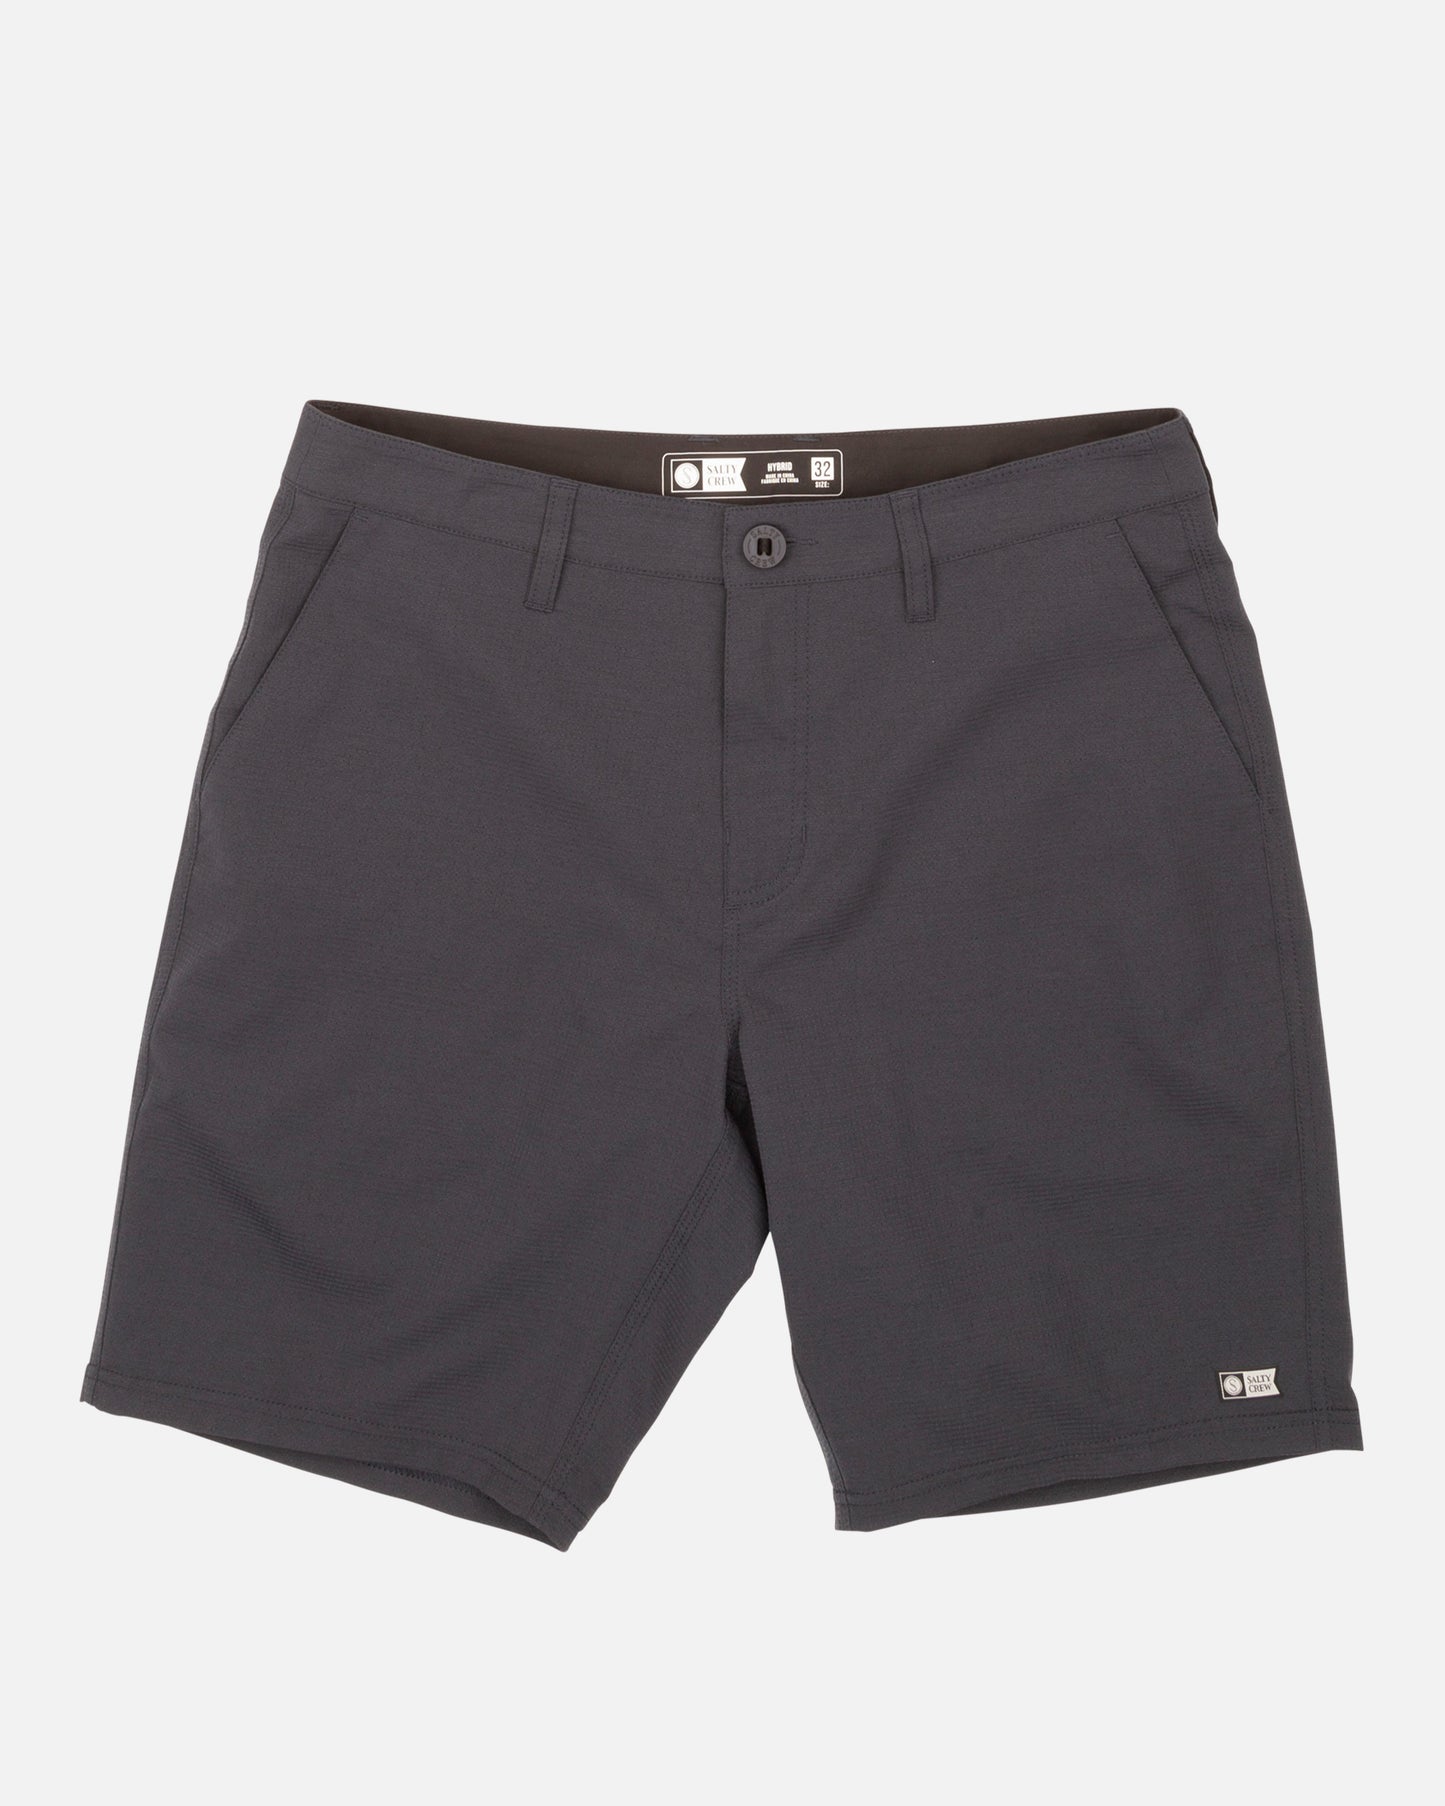 Drifter 2 Vero Navy Perforated